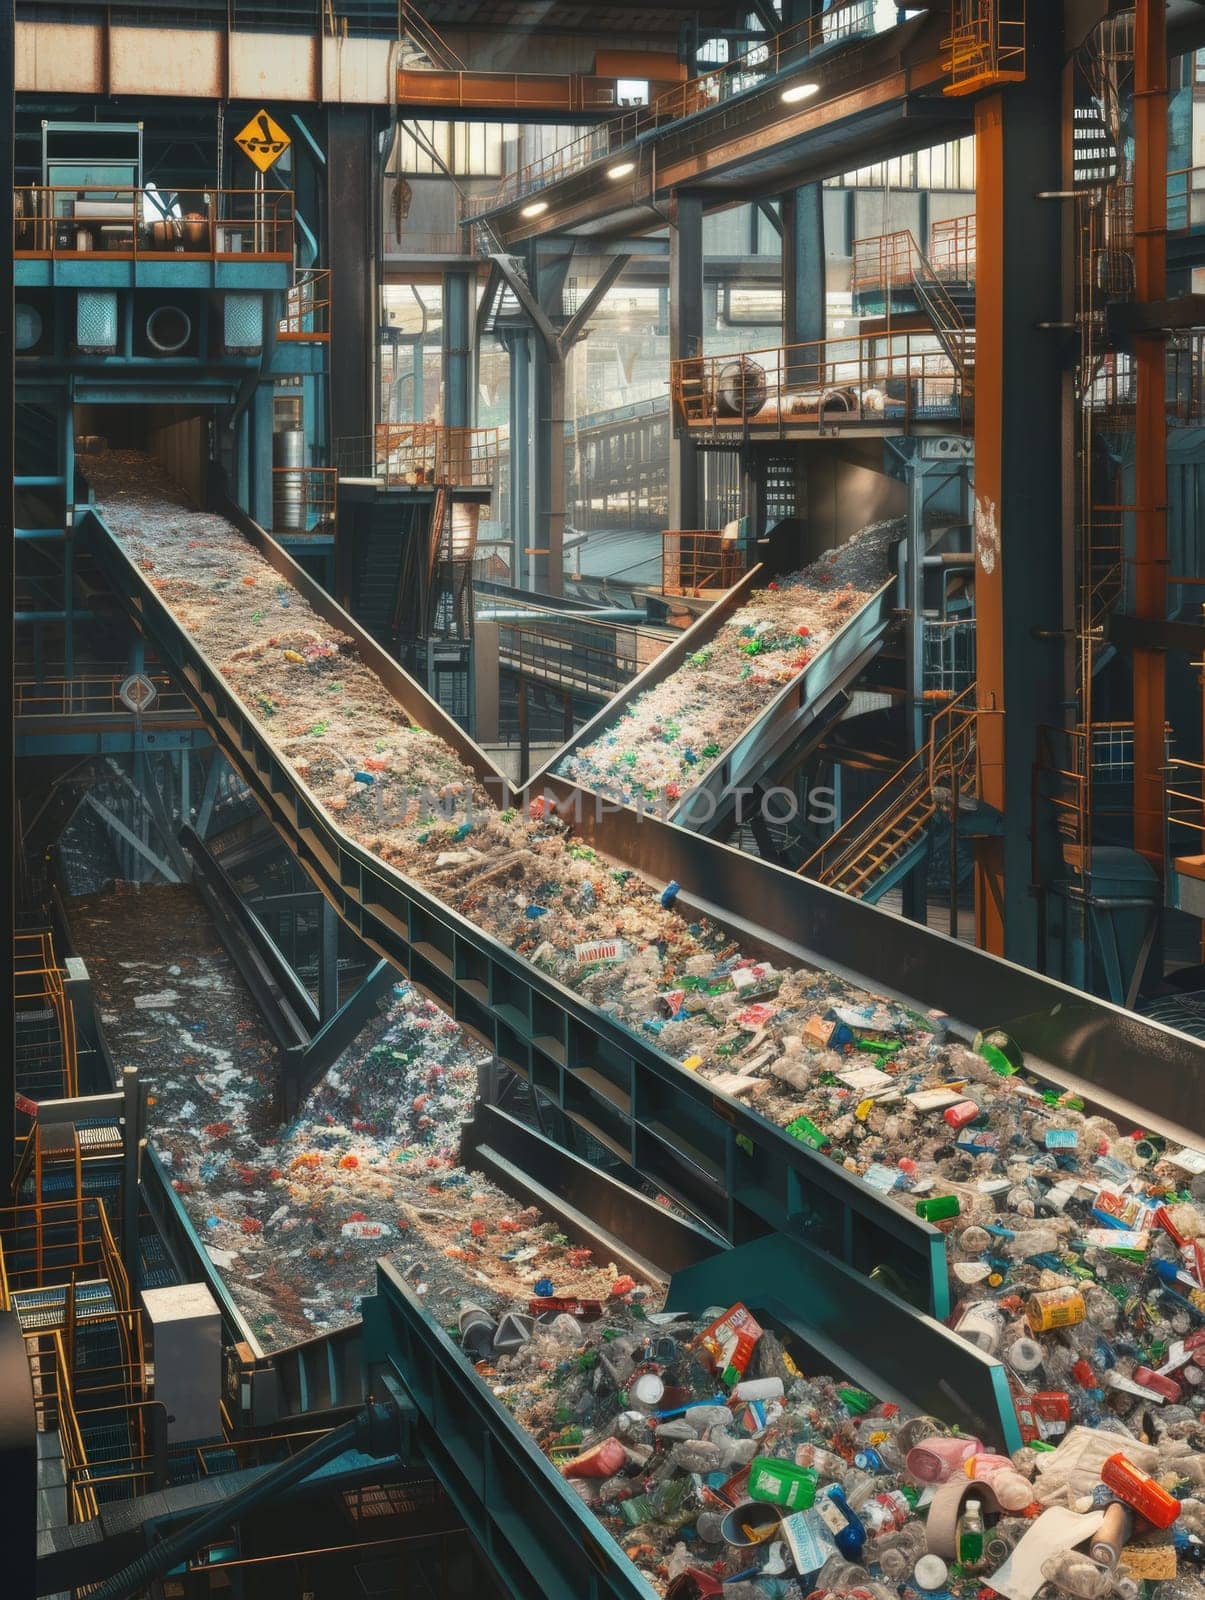 Overlooking the complex system of conveyor belts in a recycling facility sorting mountains of waste